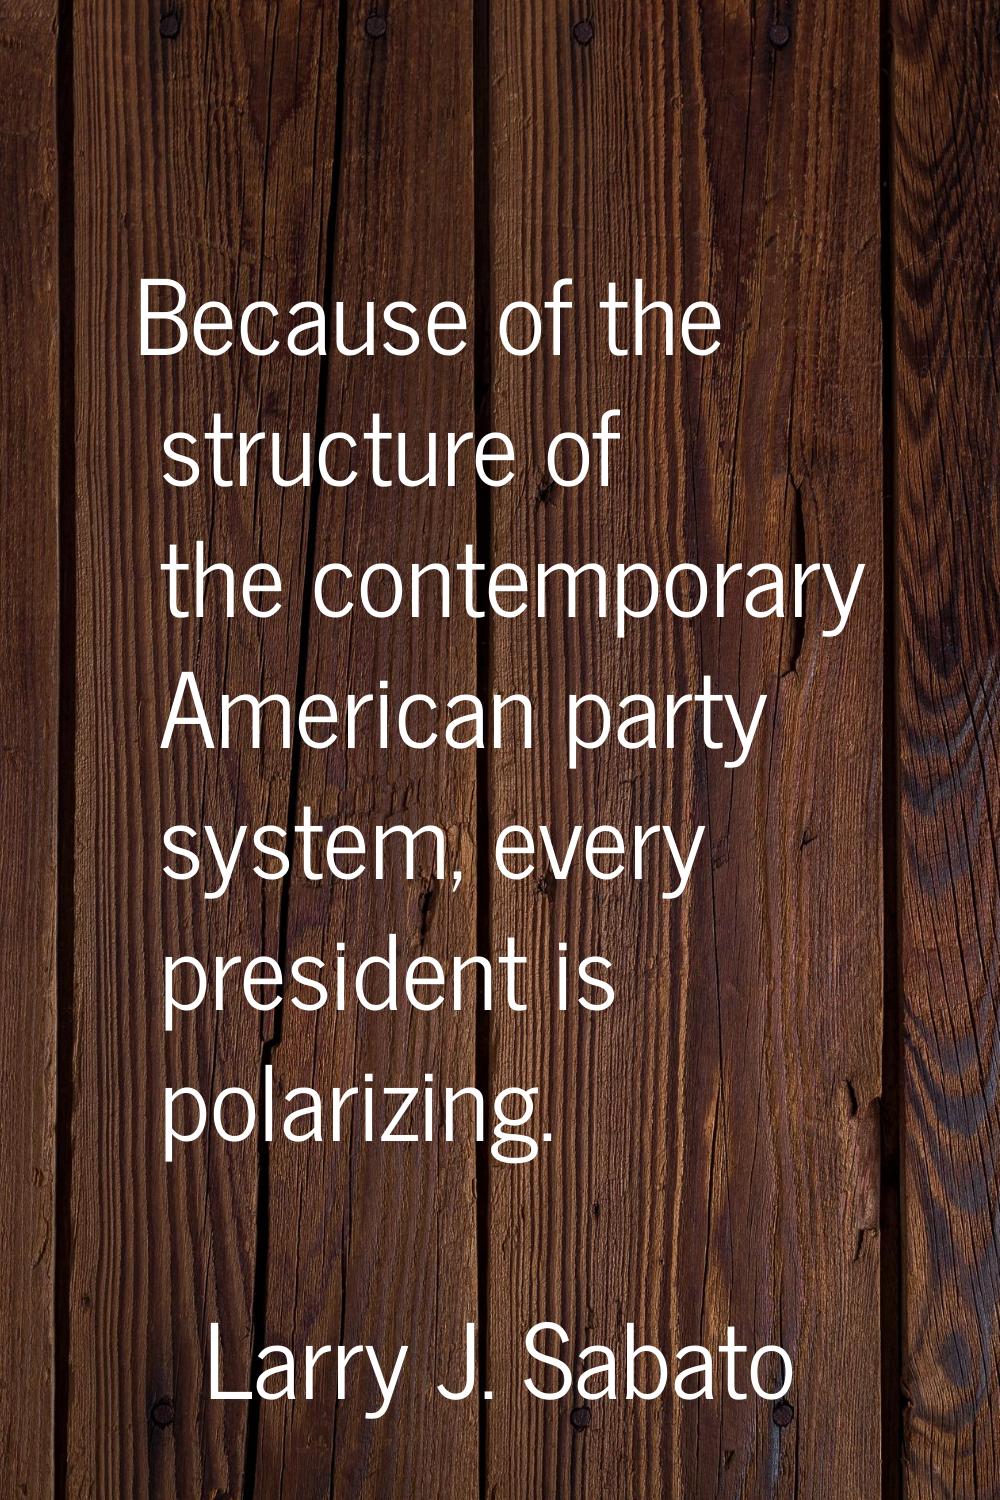 Because of the structure of the contemporary American party system, every president is polarizing.